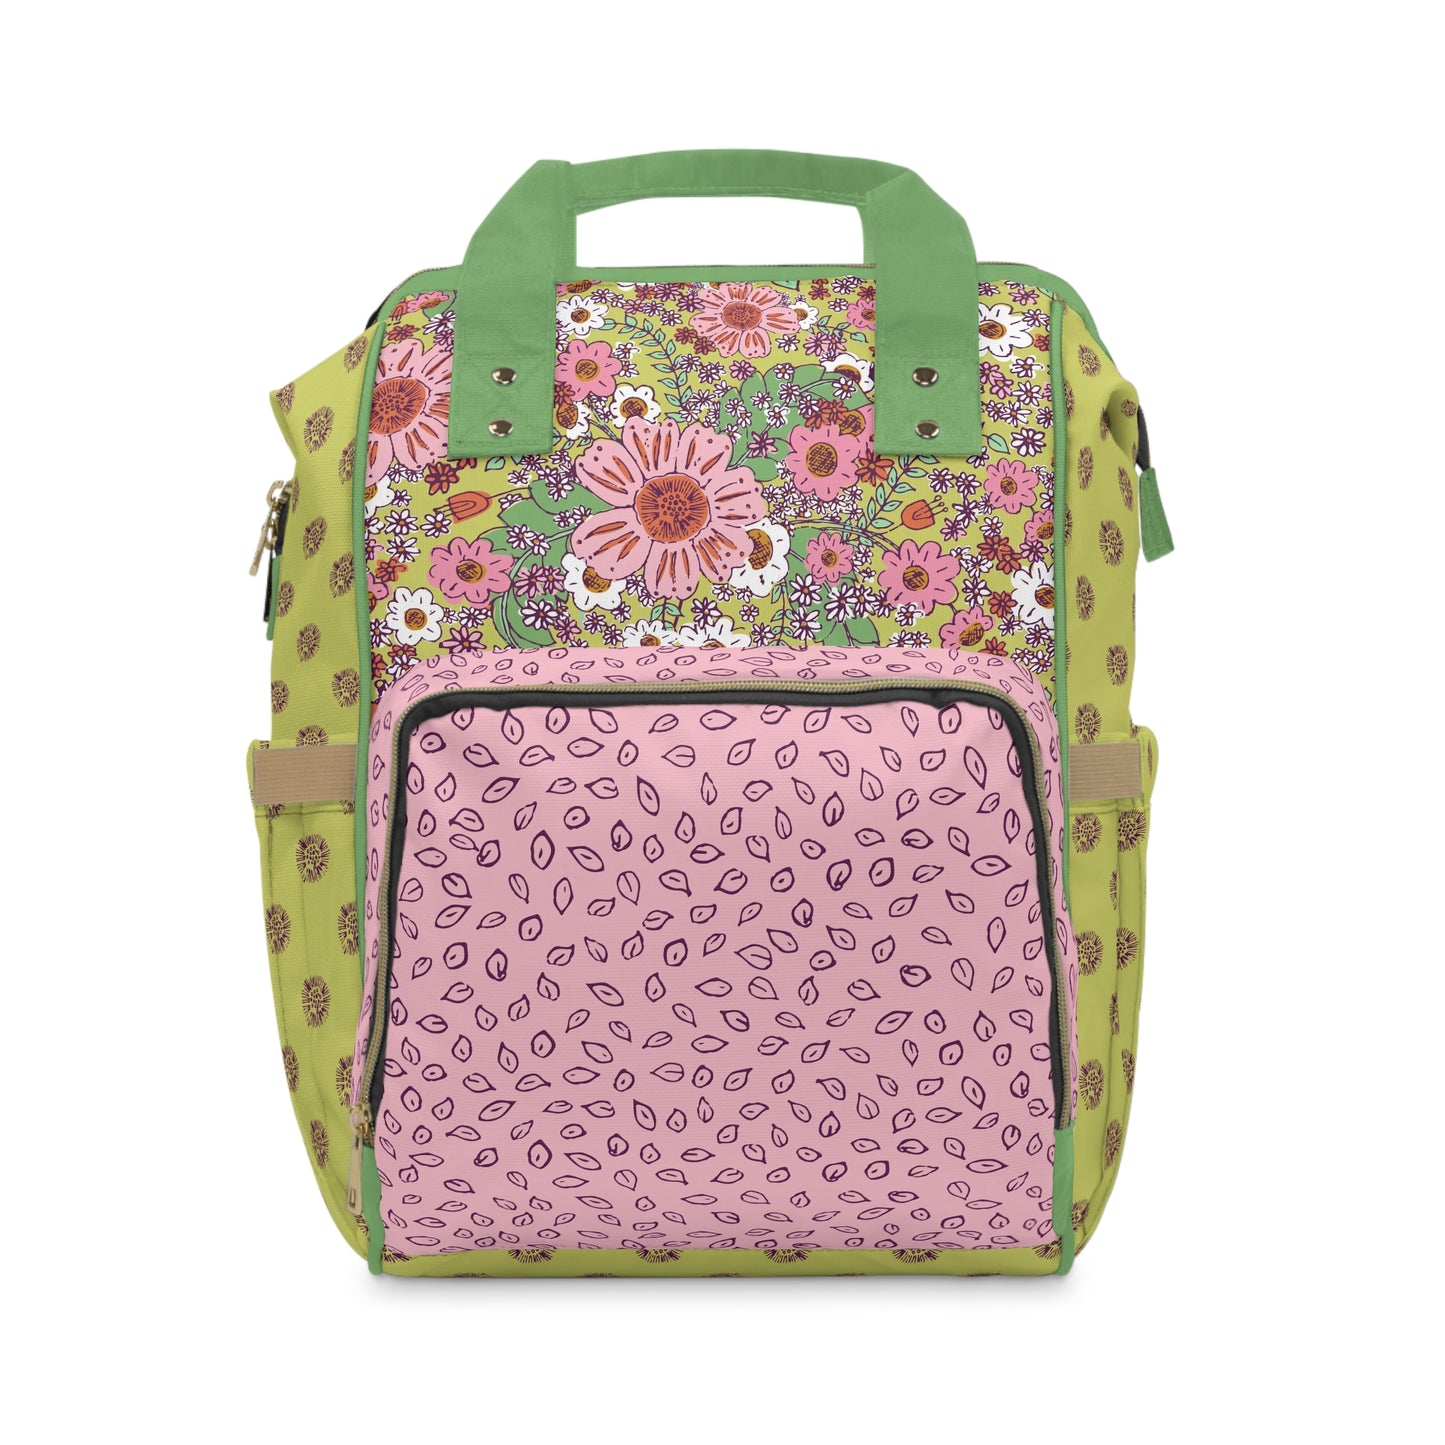 Cheerful Watercolor Flowers on Bright Green Multifunctional Diaper Backpack